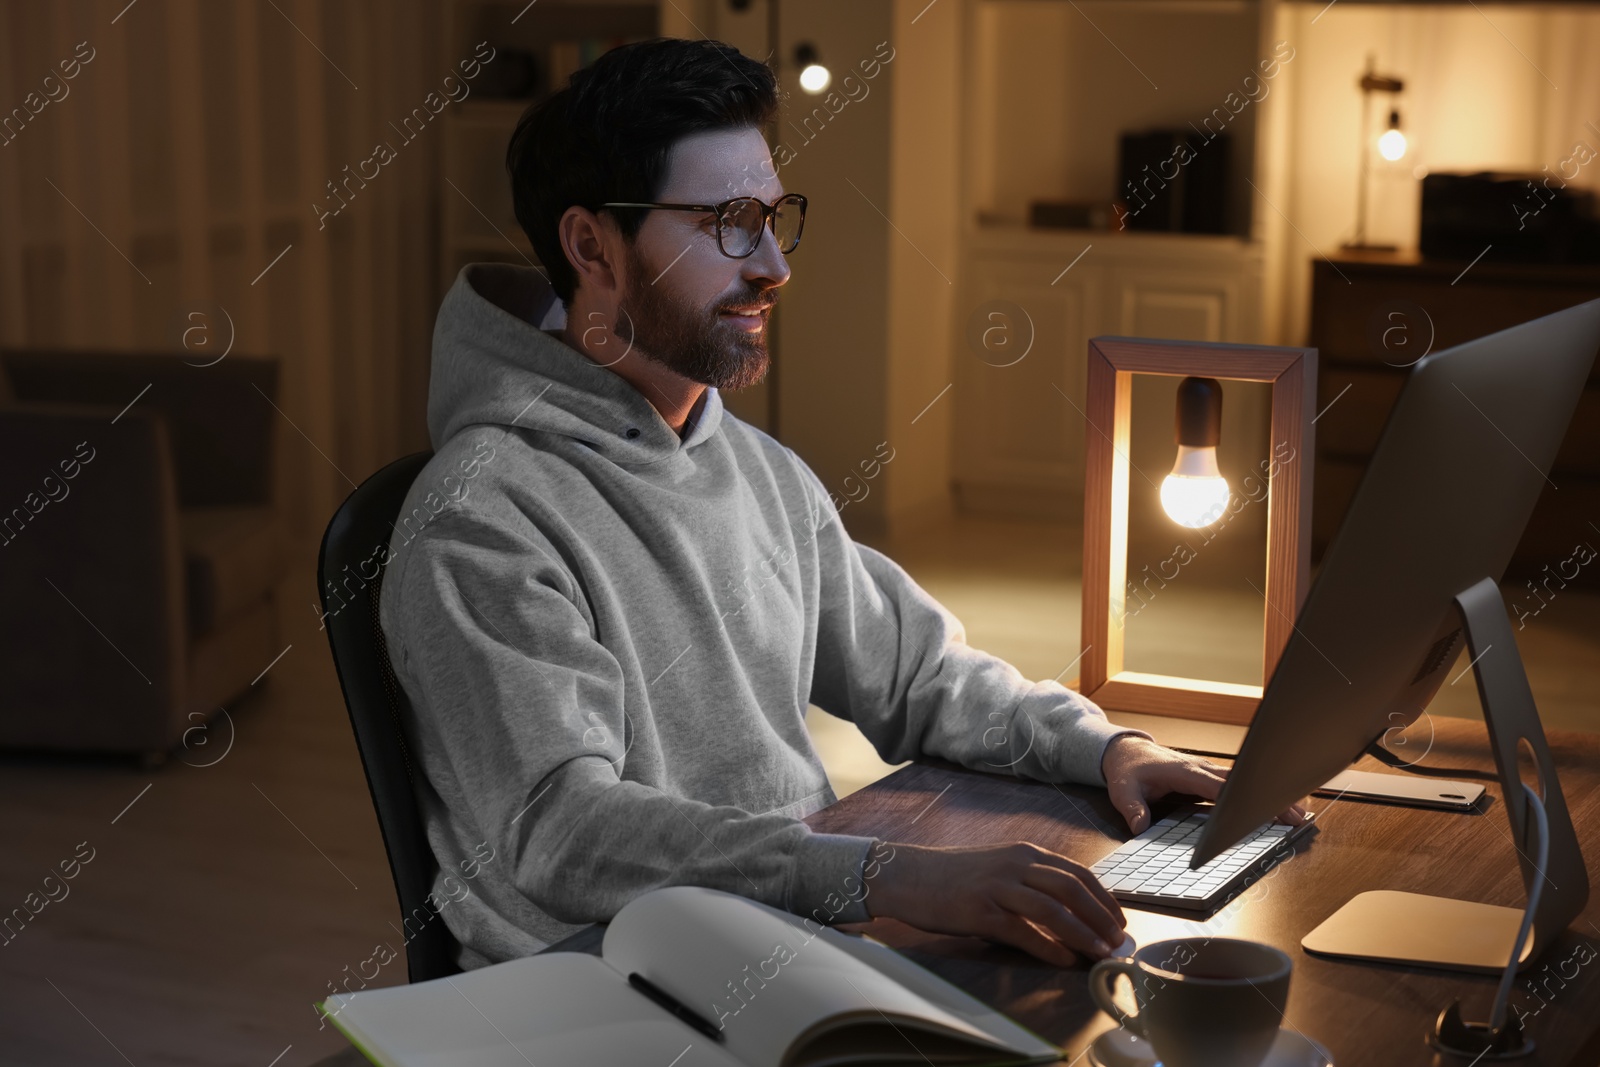 Photo of Home workplace. Man working with computer at wooden desk in room at night